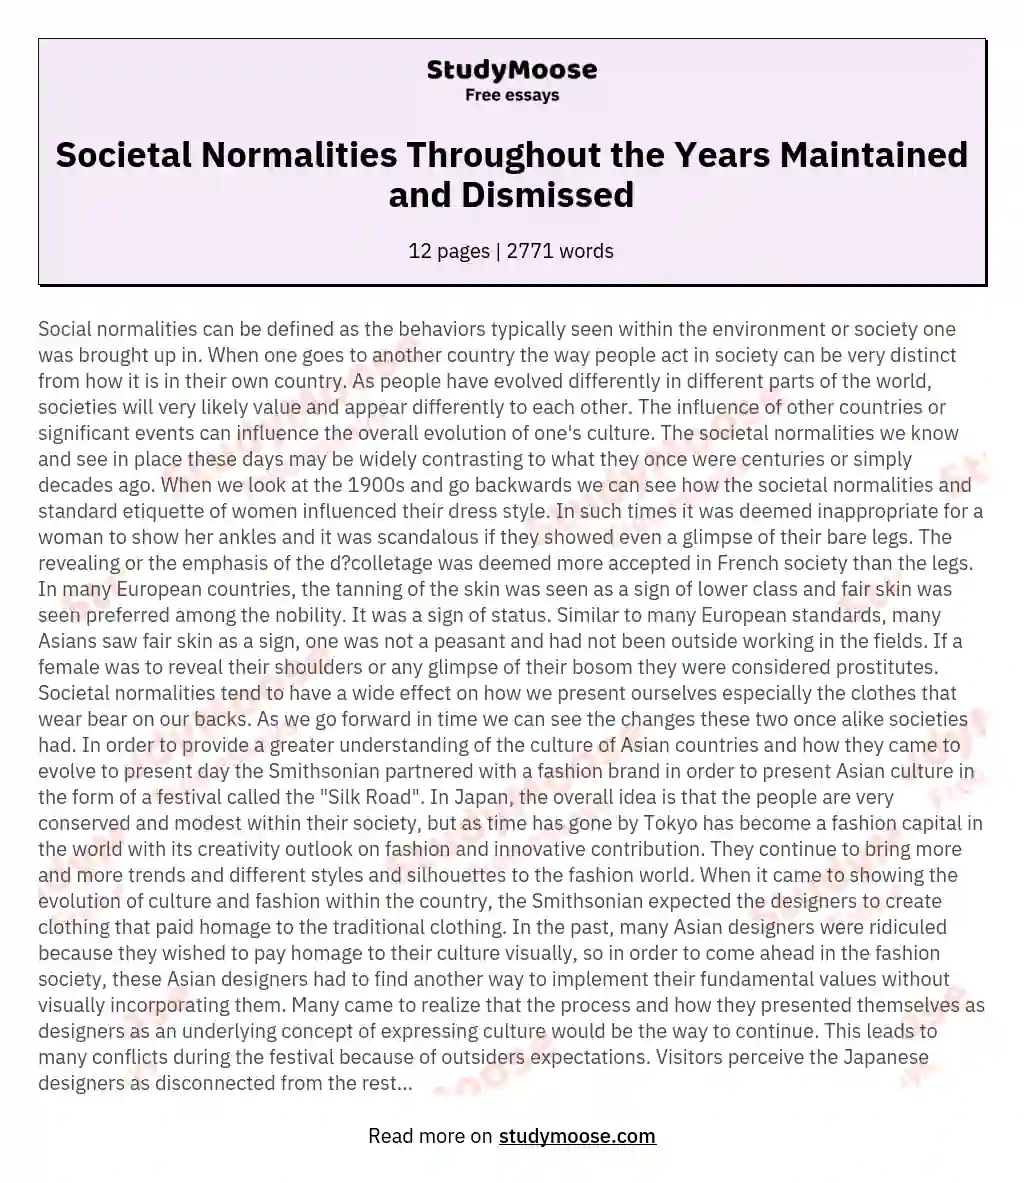 Societal Normalities Throughout the Years Maintained and Dismissed essay